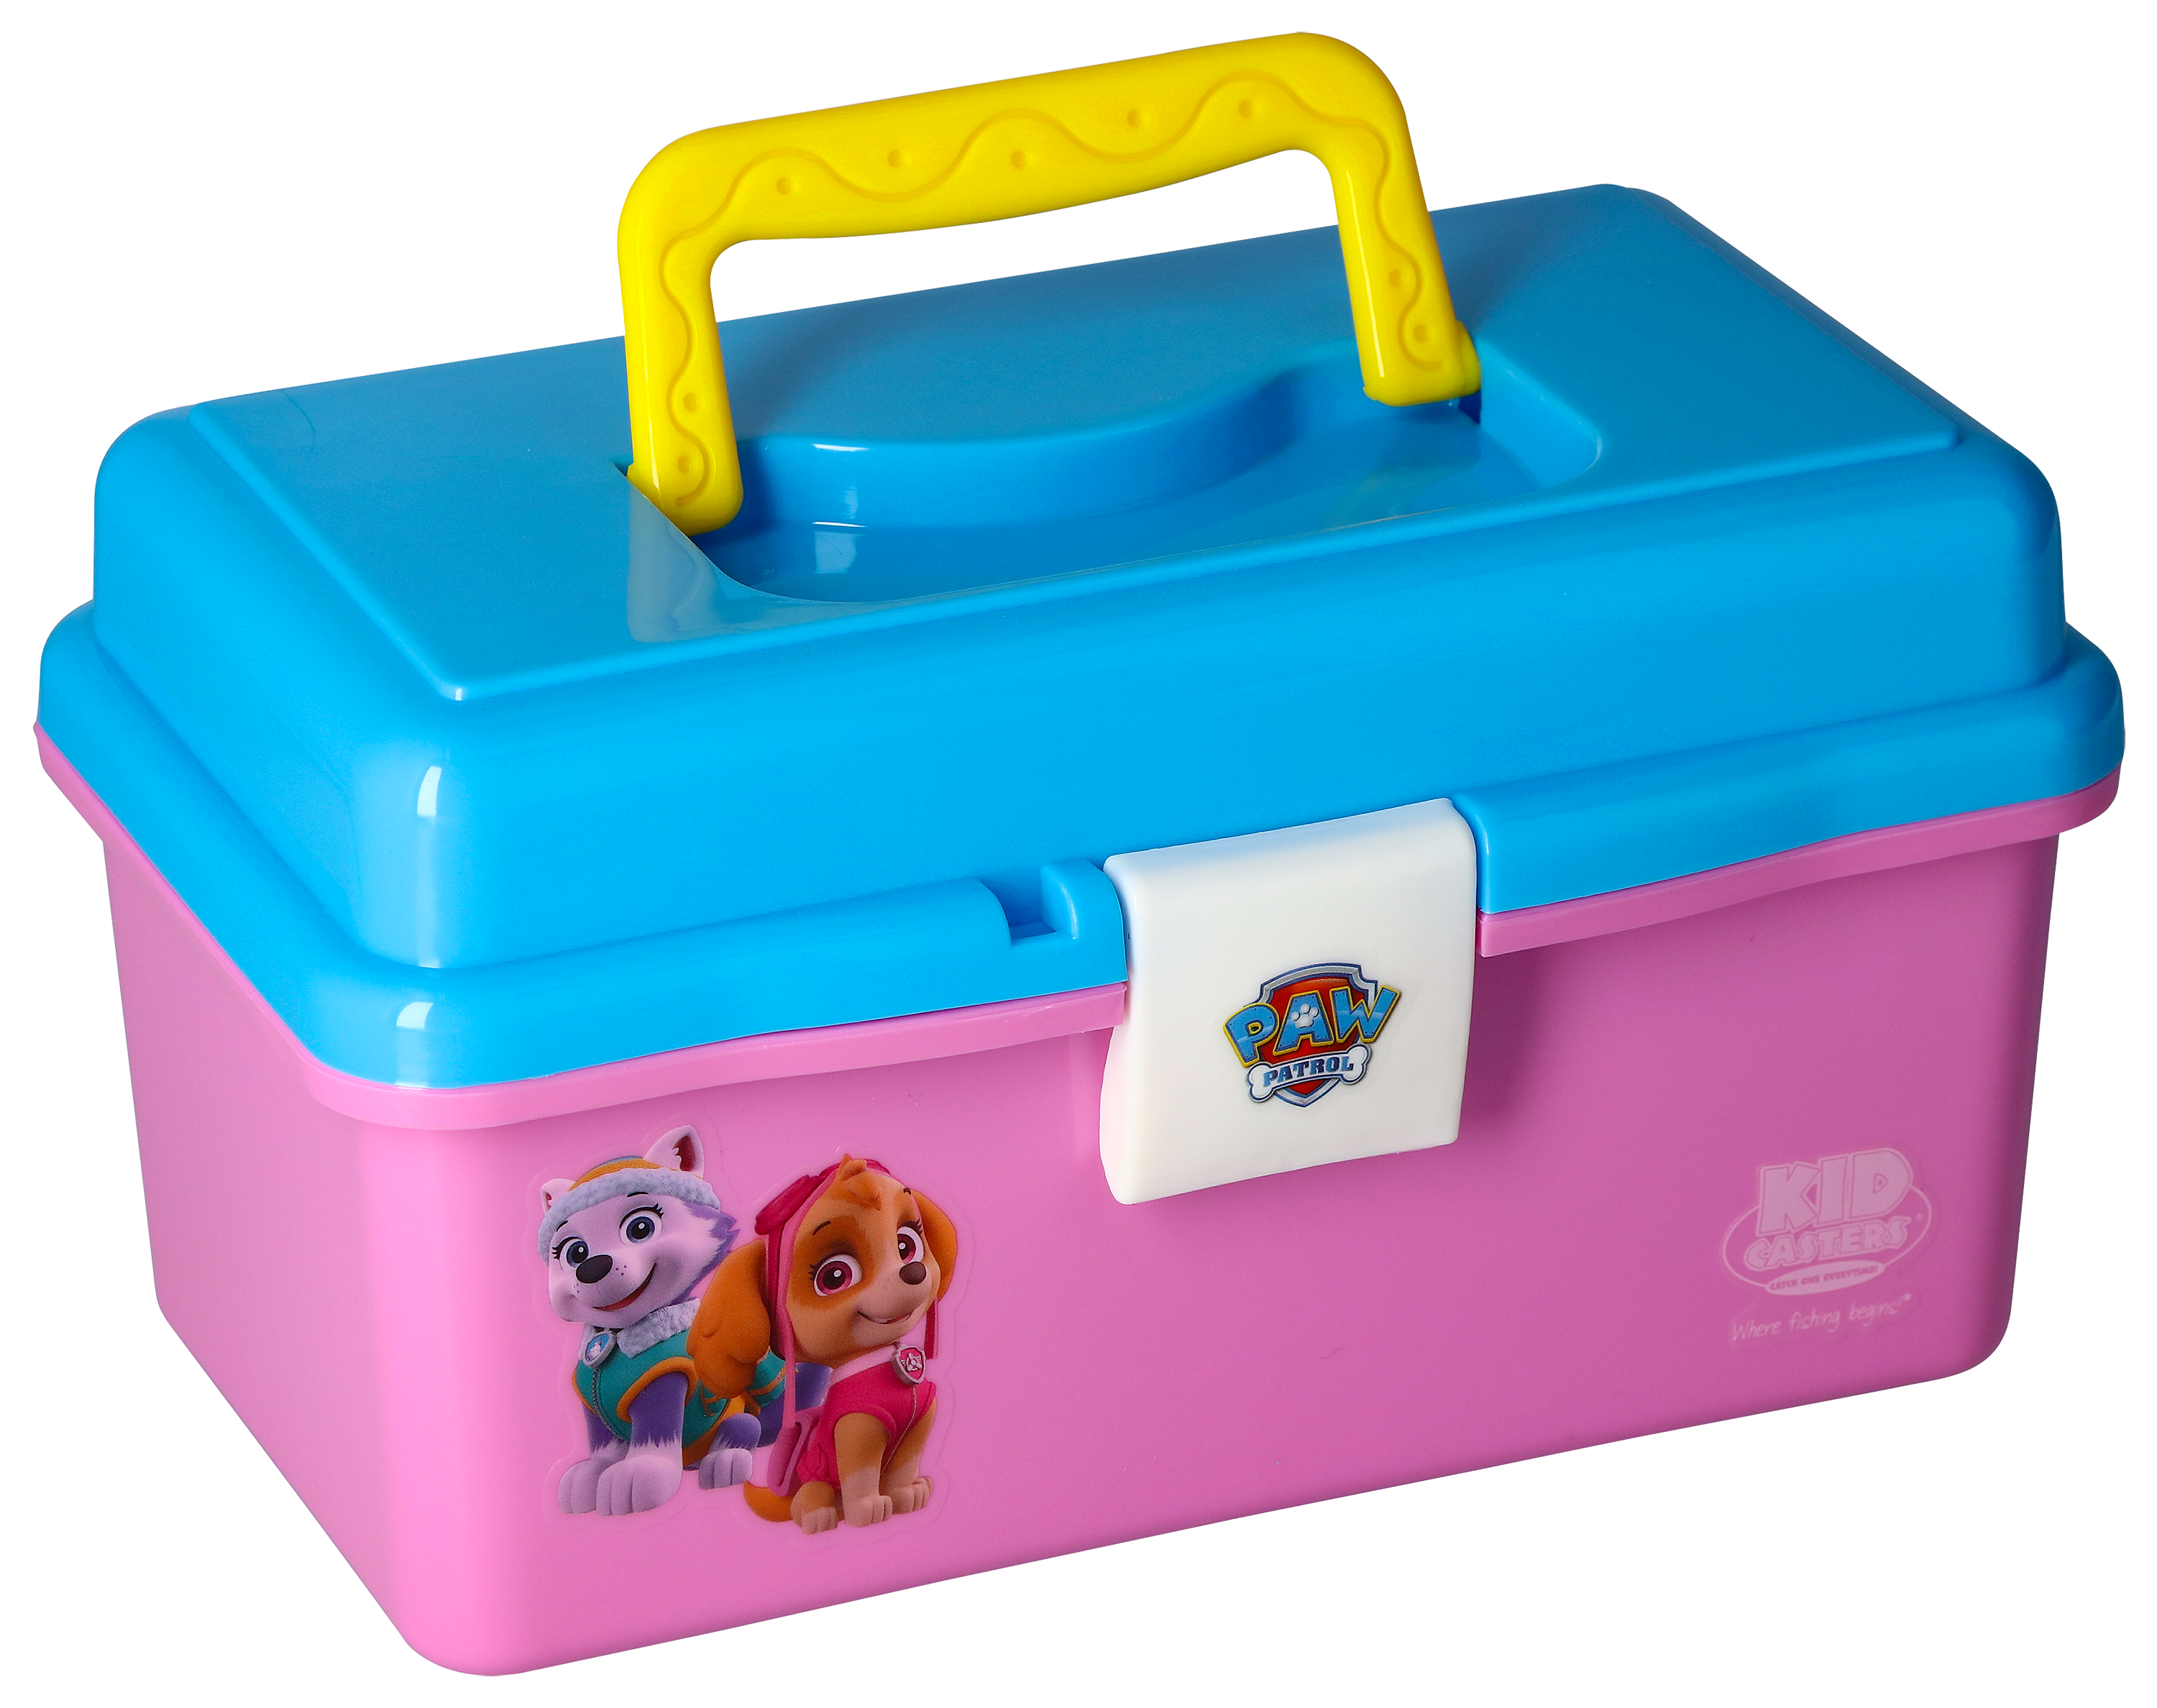 Kid Casters Pink Play Box